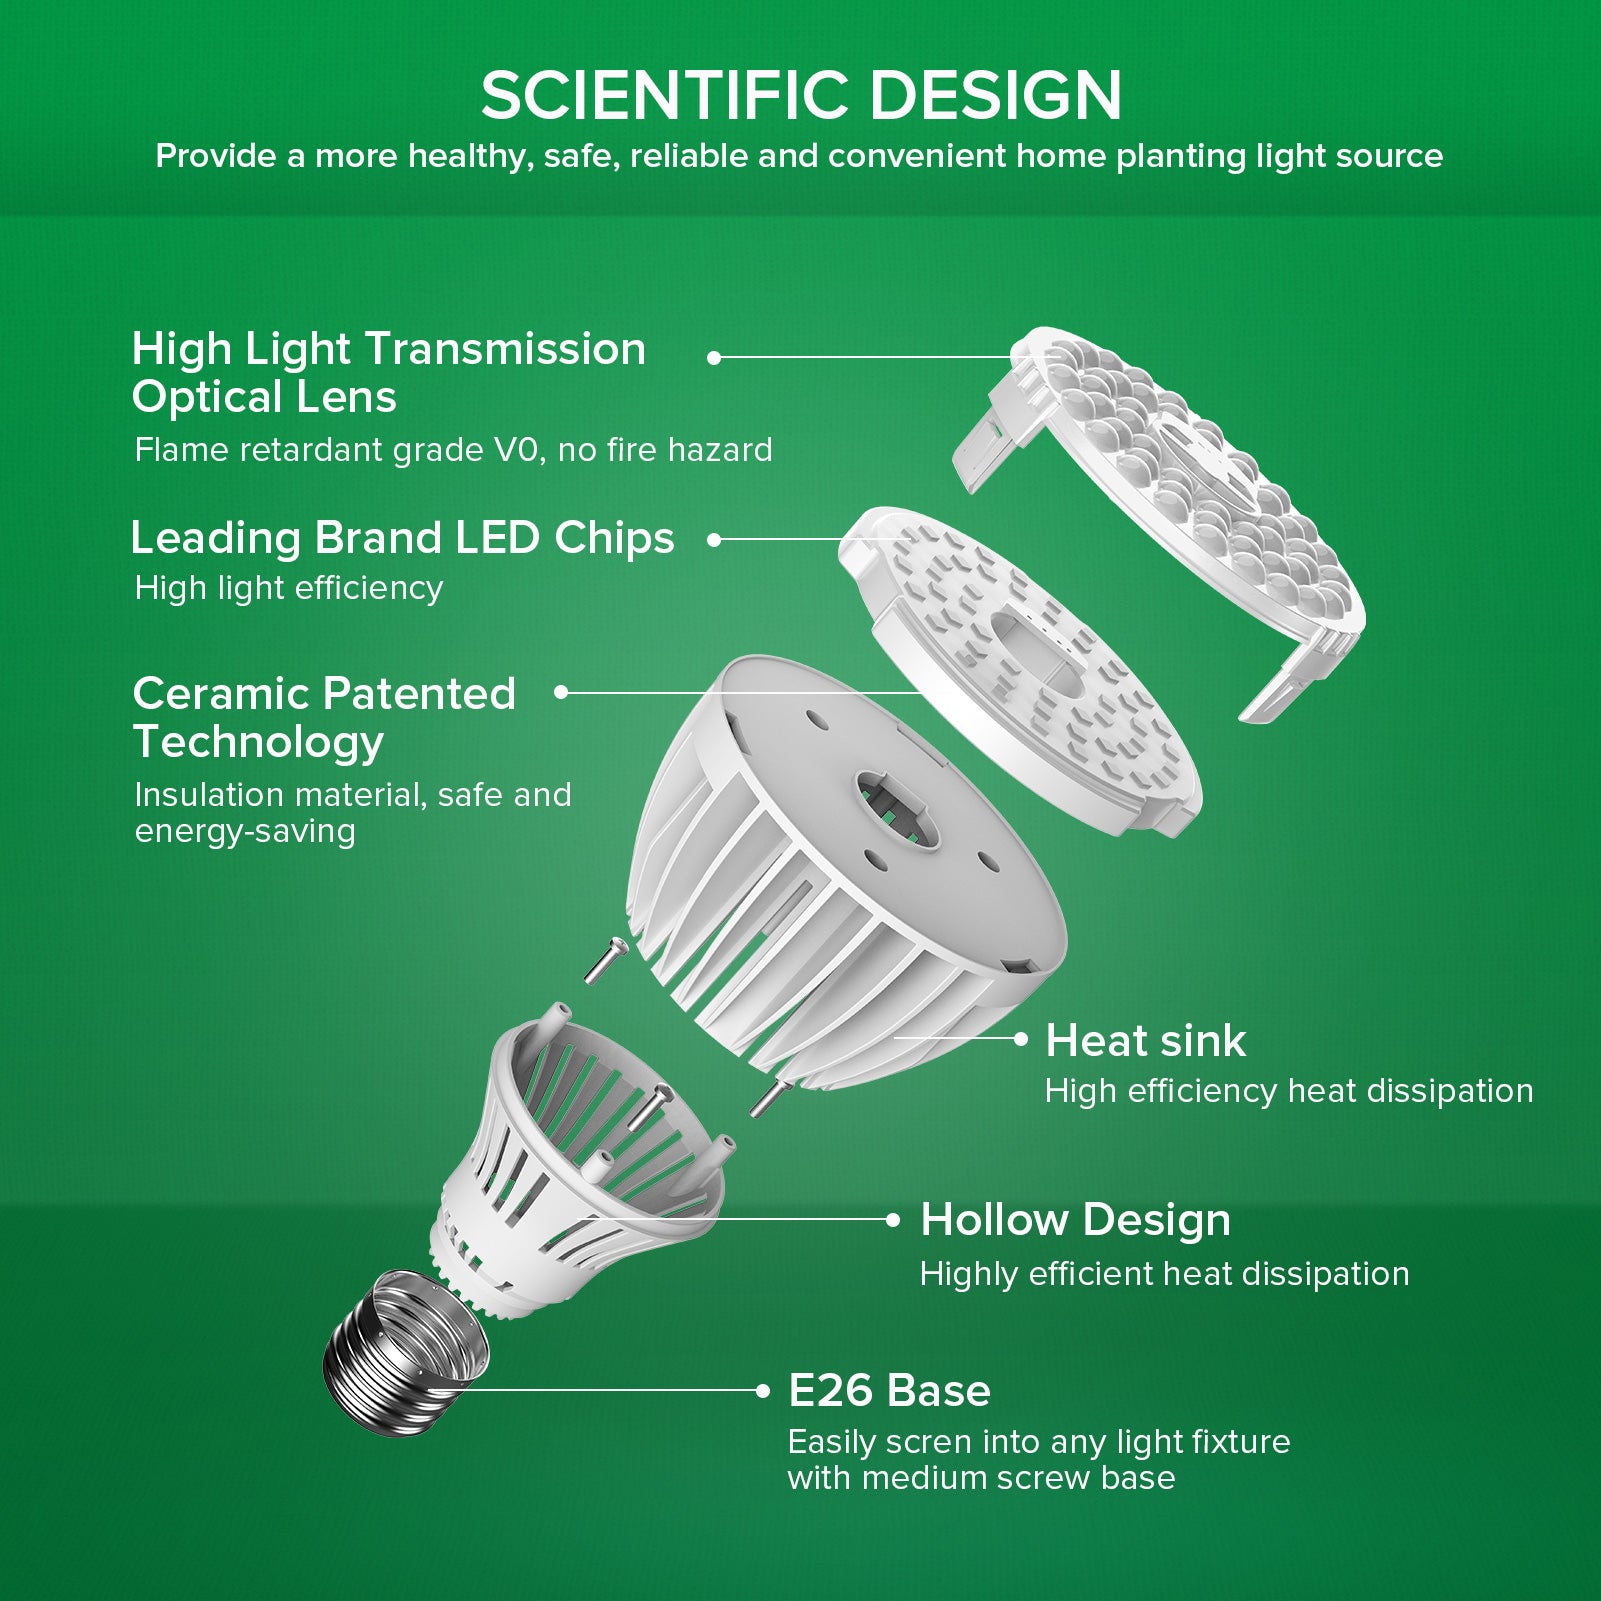 PAR25 32W LED Grow Light Bulb  with hollow design, high quality IC driver chip, full spectrum led chips and high light transmission optical lens